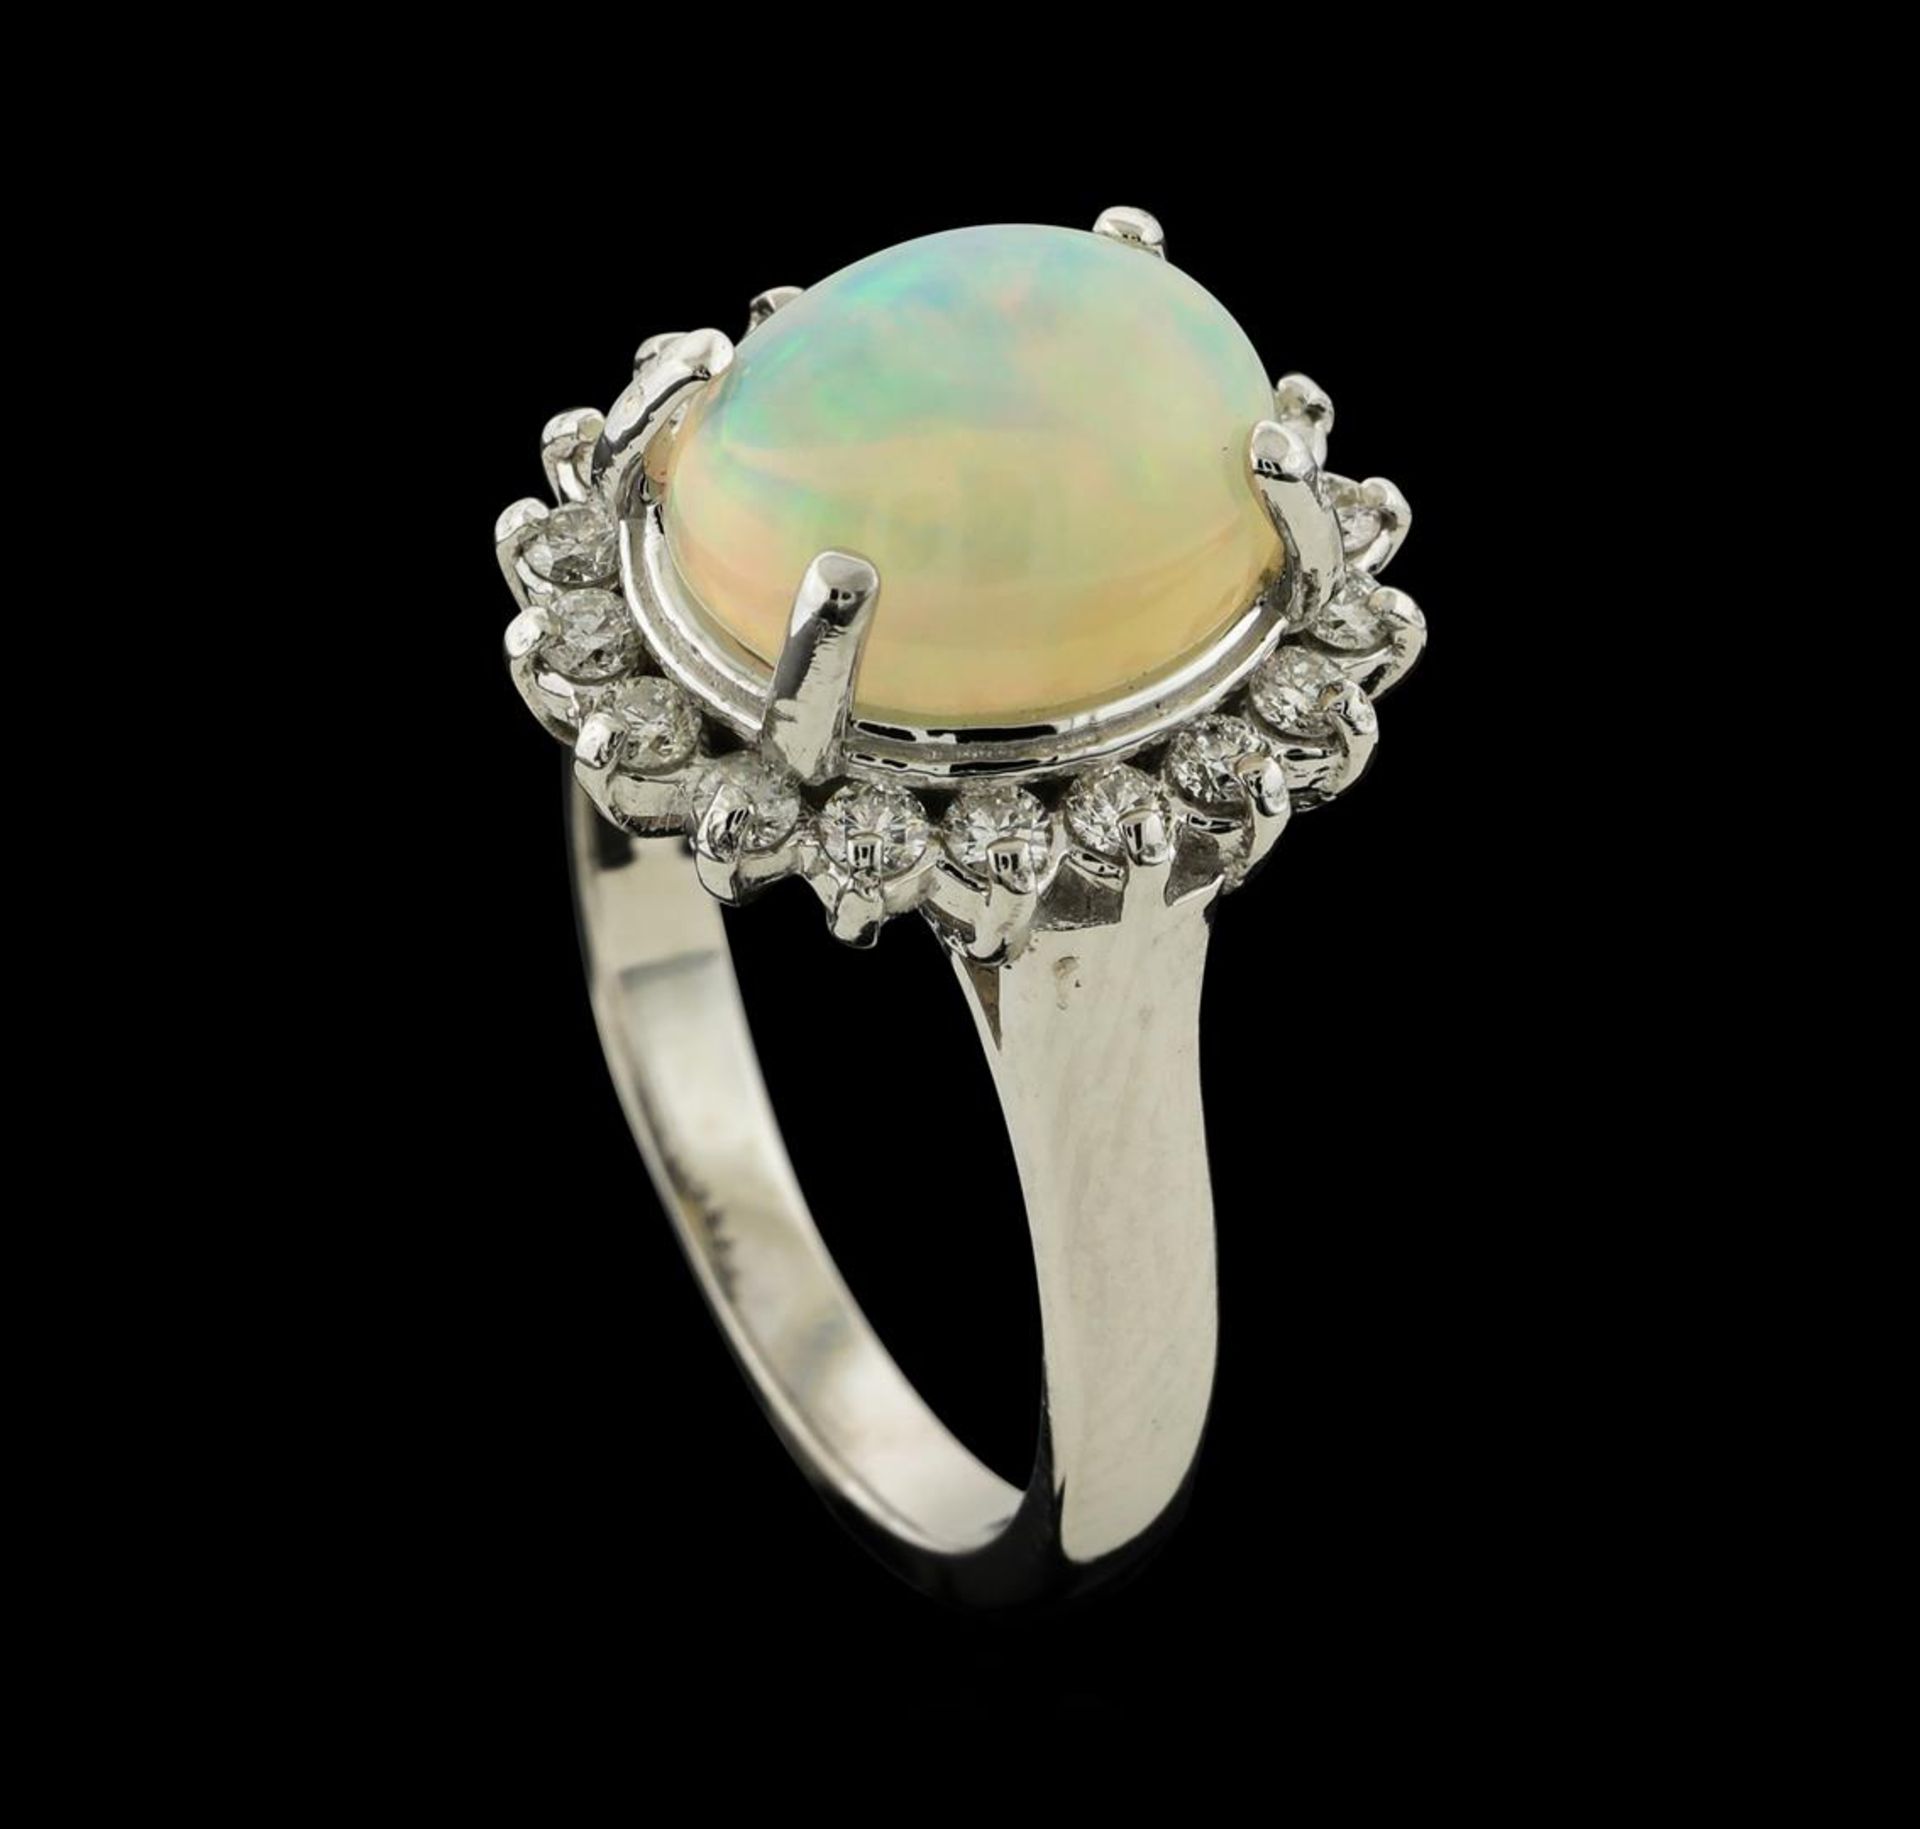 2.66 ctw Opal and Diamond Ring - 14KT White Gold - Image 4 of 4